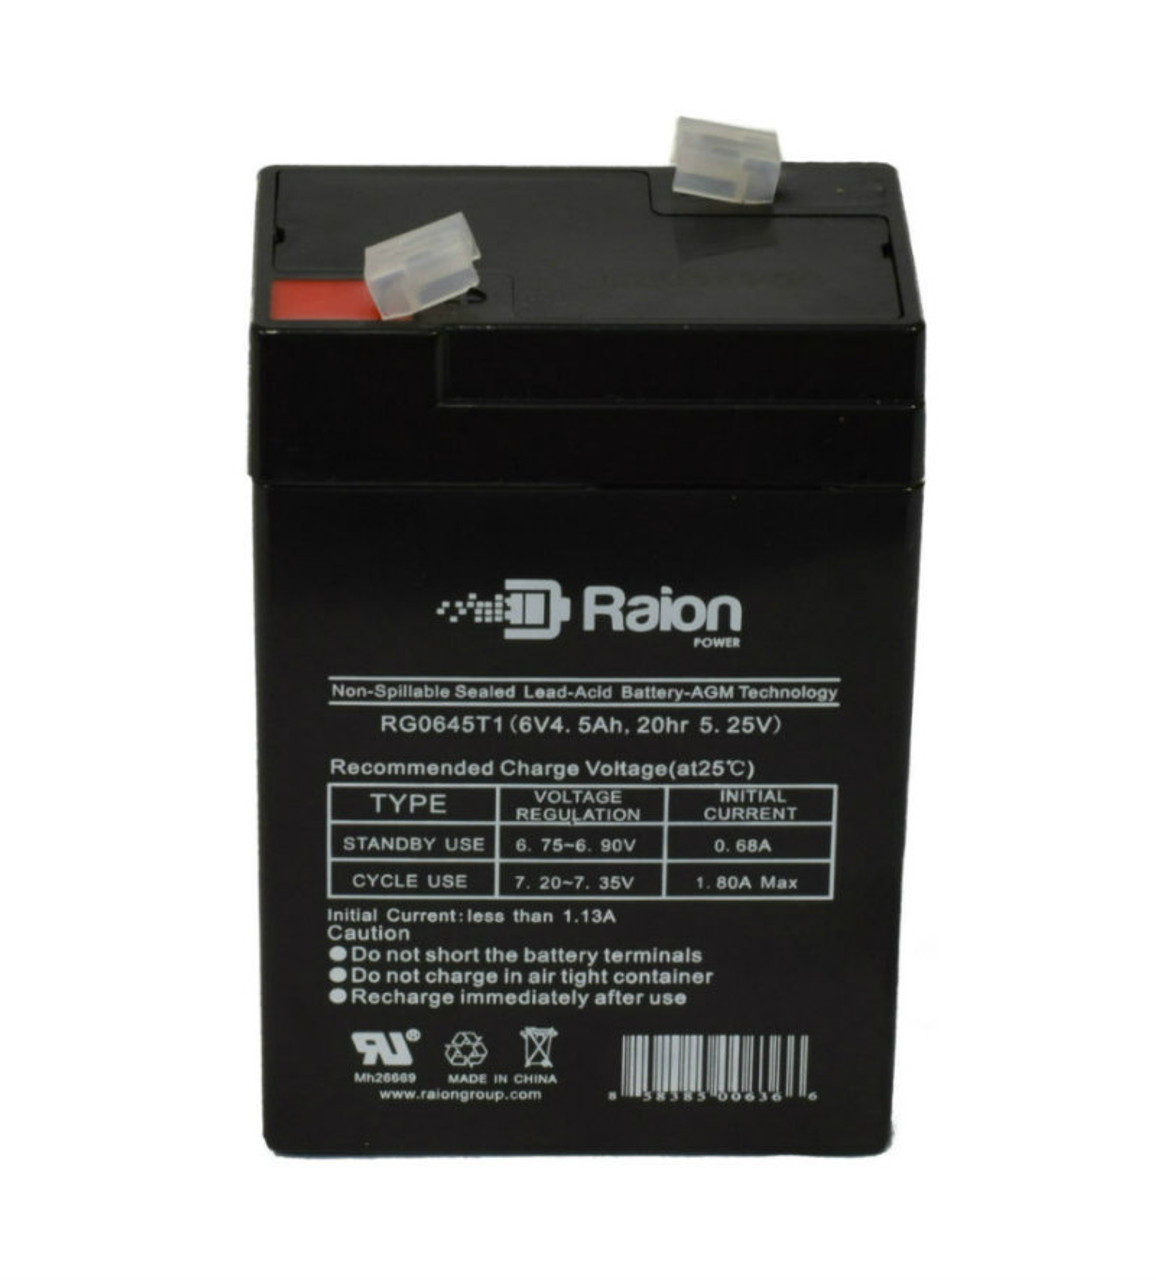 Raion Power RG0645T1 Replacement Battery Cartridge for Kaiying KS3-6